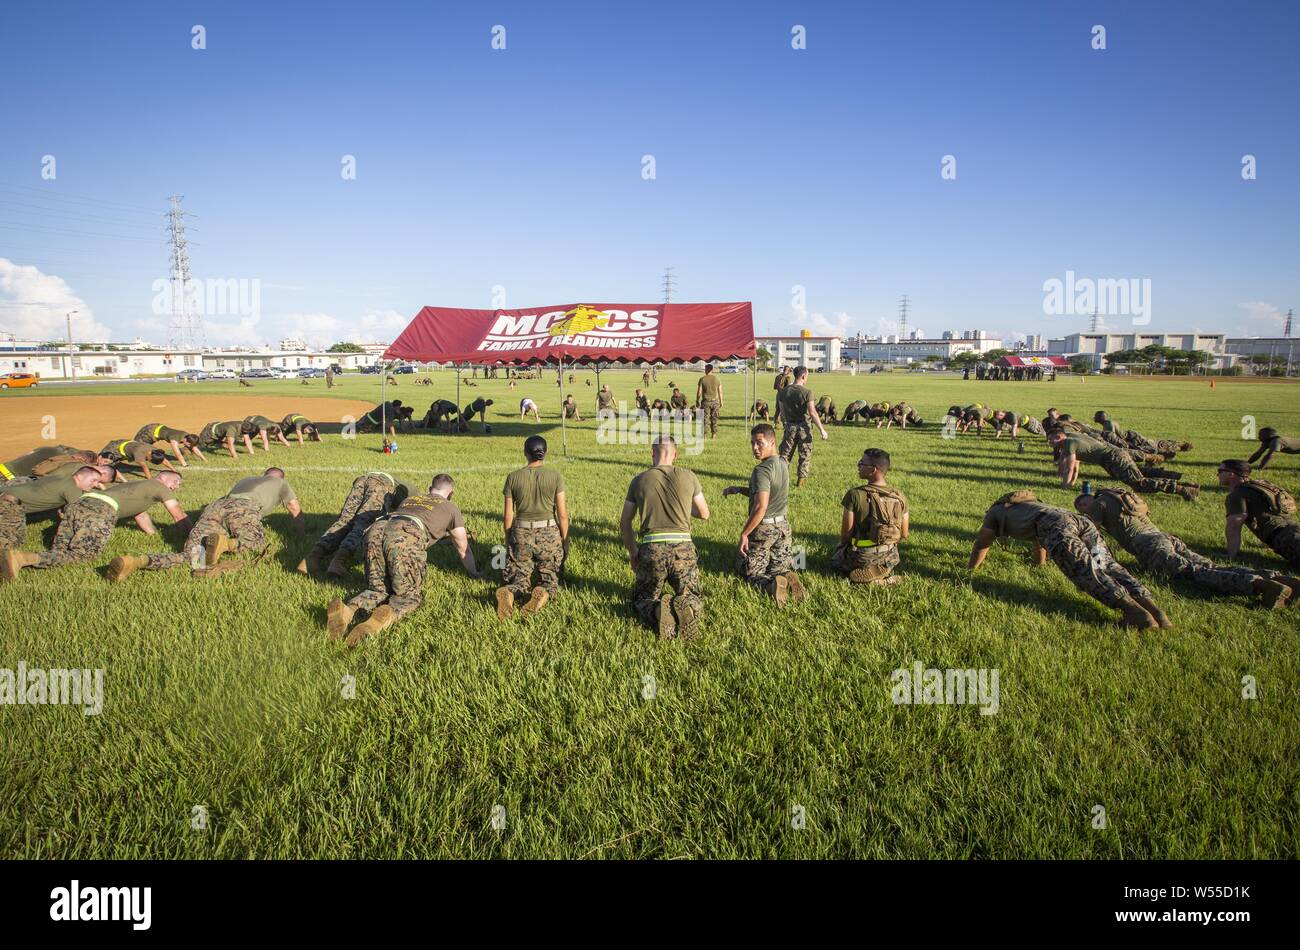 Marines with Marine Wing Headquarters Squadron 1 perform various exercises during their annual Battle Skills Test on Camp Foster, Okinawa, Japan, July 26, 2019, July 26, 2019. Every Marine must be physically fit, regardless of age, grade, or duty assignment. This event provided Marines an opportunity to physically train and push themselves while building camaraderie within the unit. The annual assessment covers a variety of categories including: basic infantry skills, first aid, communications, history, leadership, and the Uniform Code of Military Justice. Being proficient in these skills ensu Stock Photo